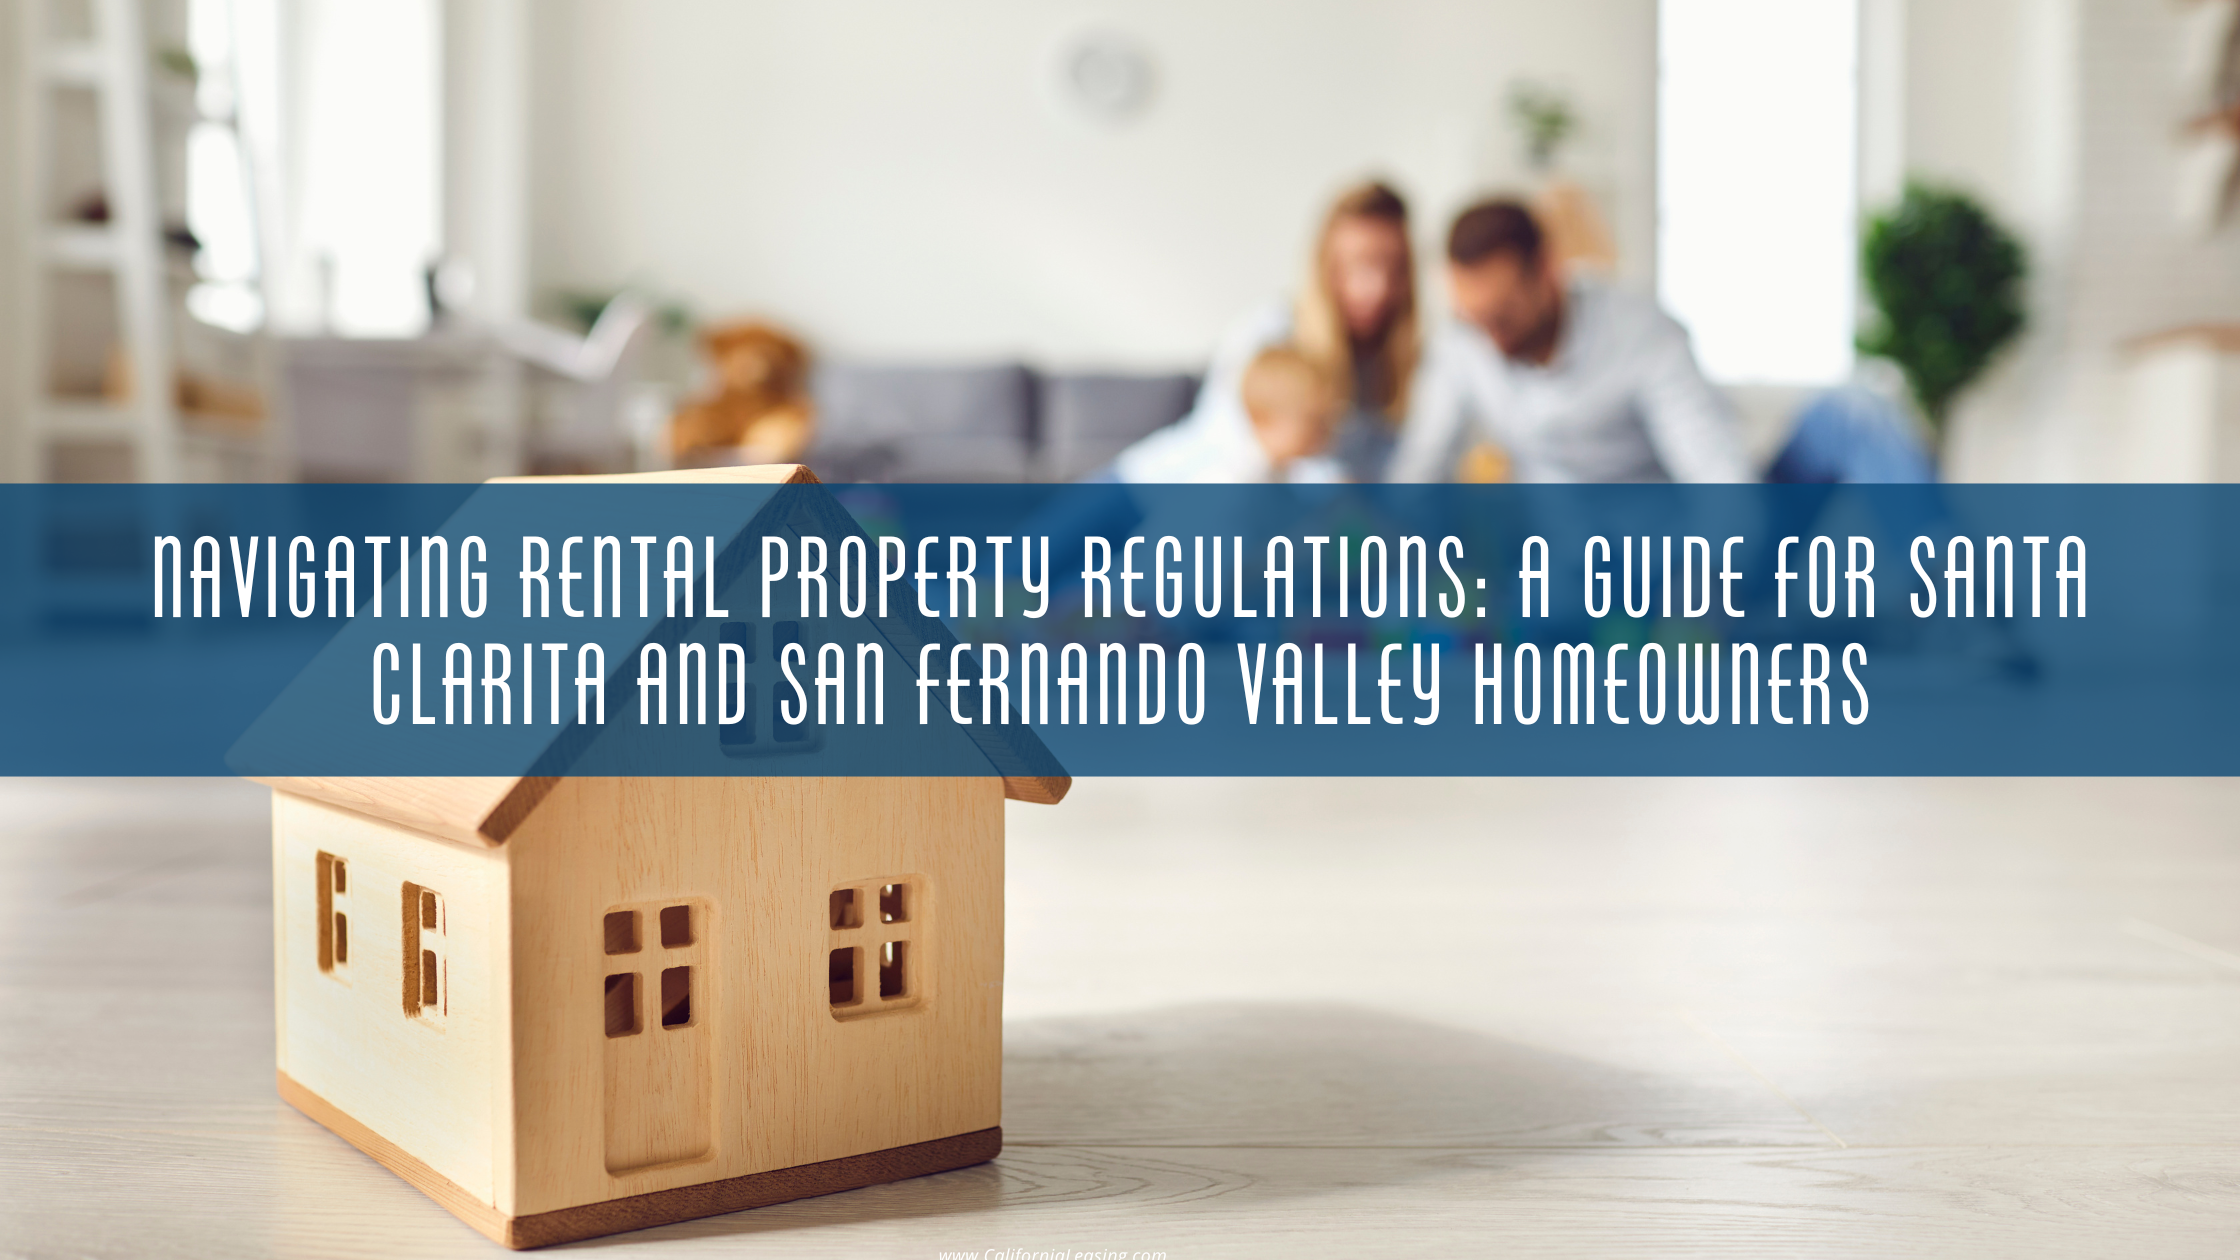 Navigating Rental Property Regulations: A Guide for Santa Clarita and San Fernando Valley Homeowners blog post from California leasing property management